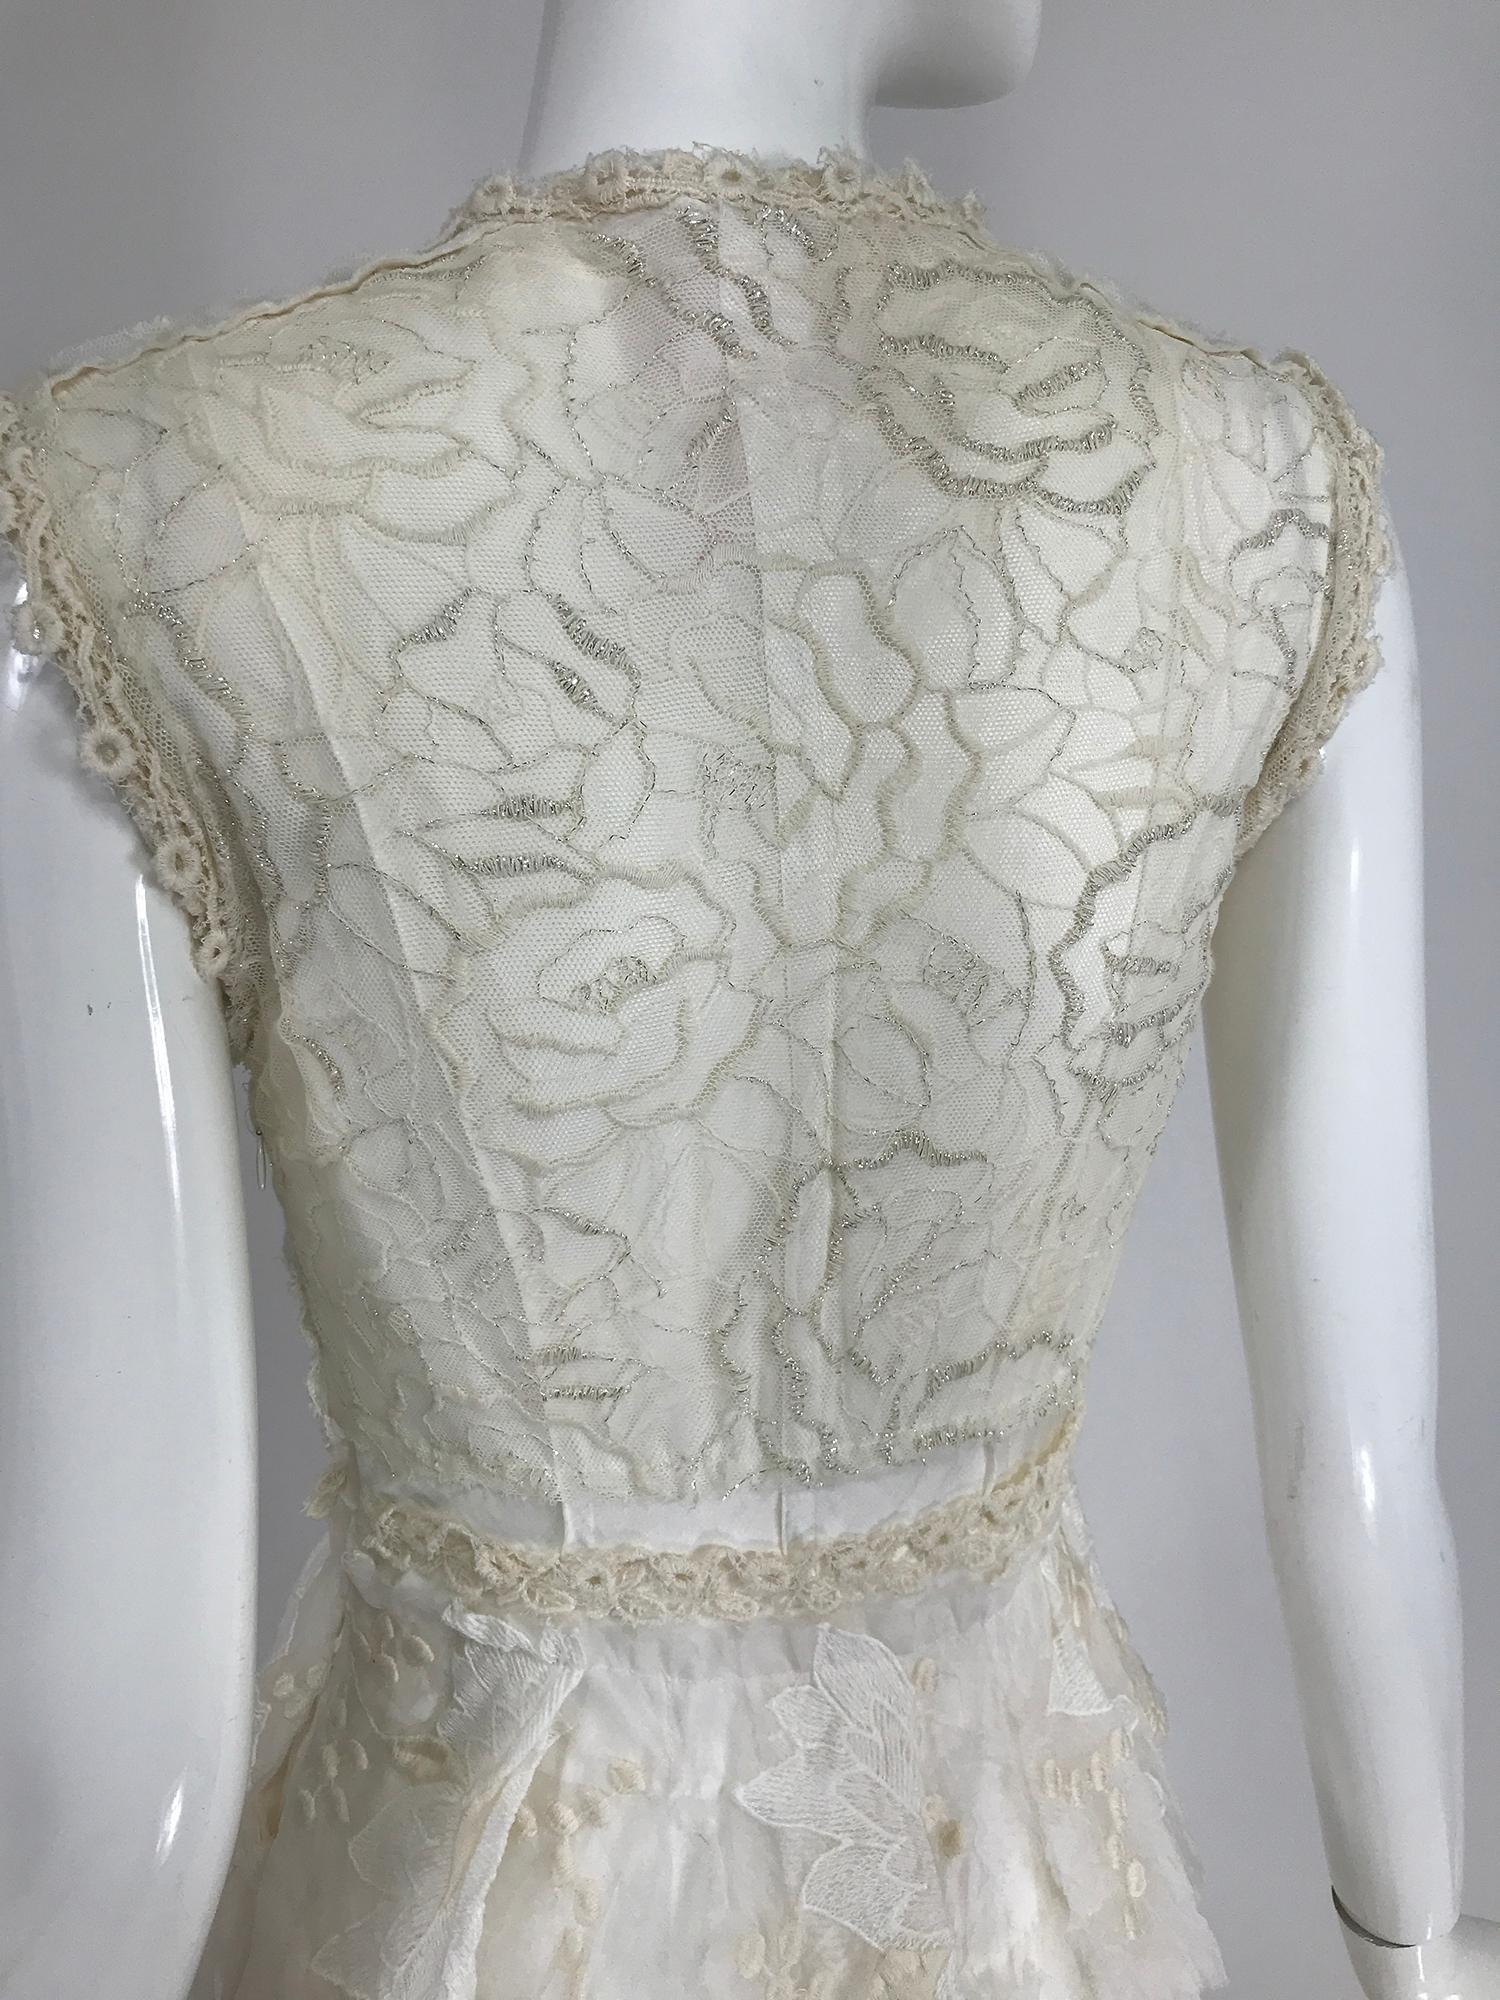 Gray Gregory Parkinson Pieced Applique White Silk and Lace Dress